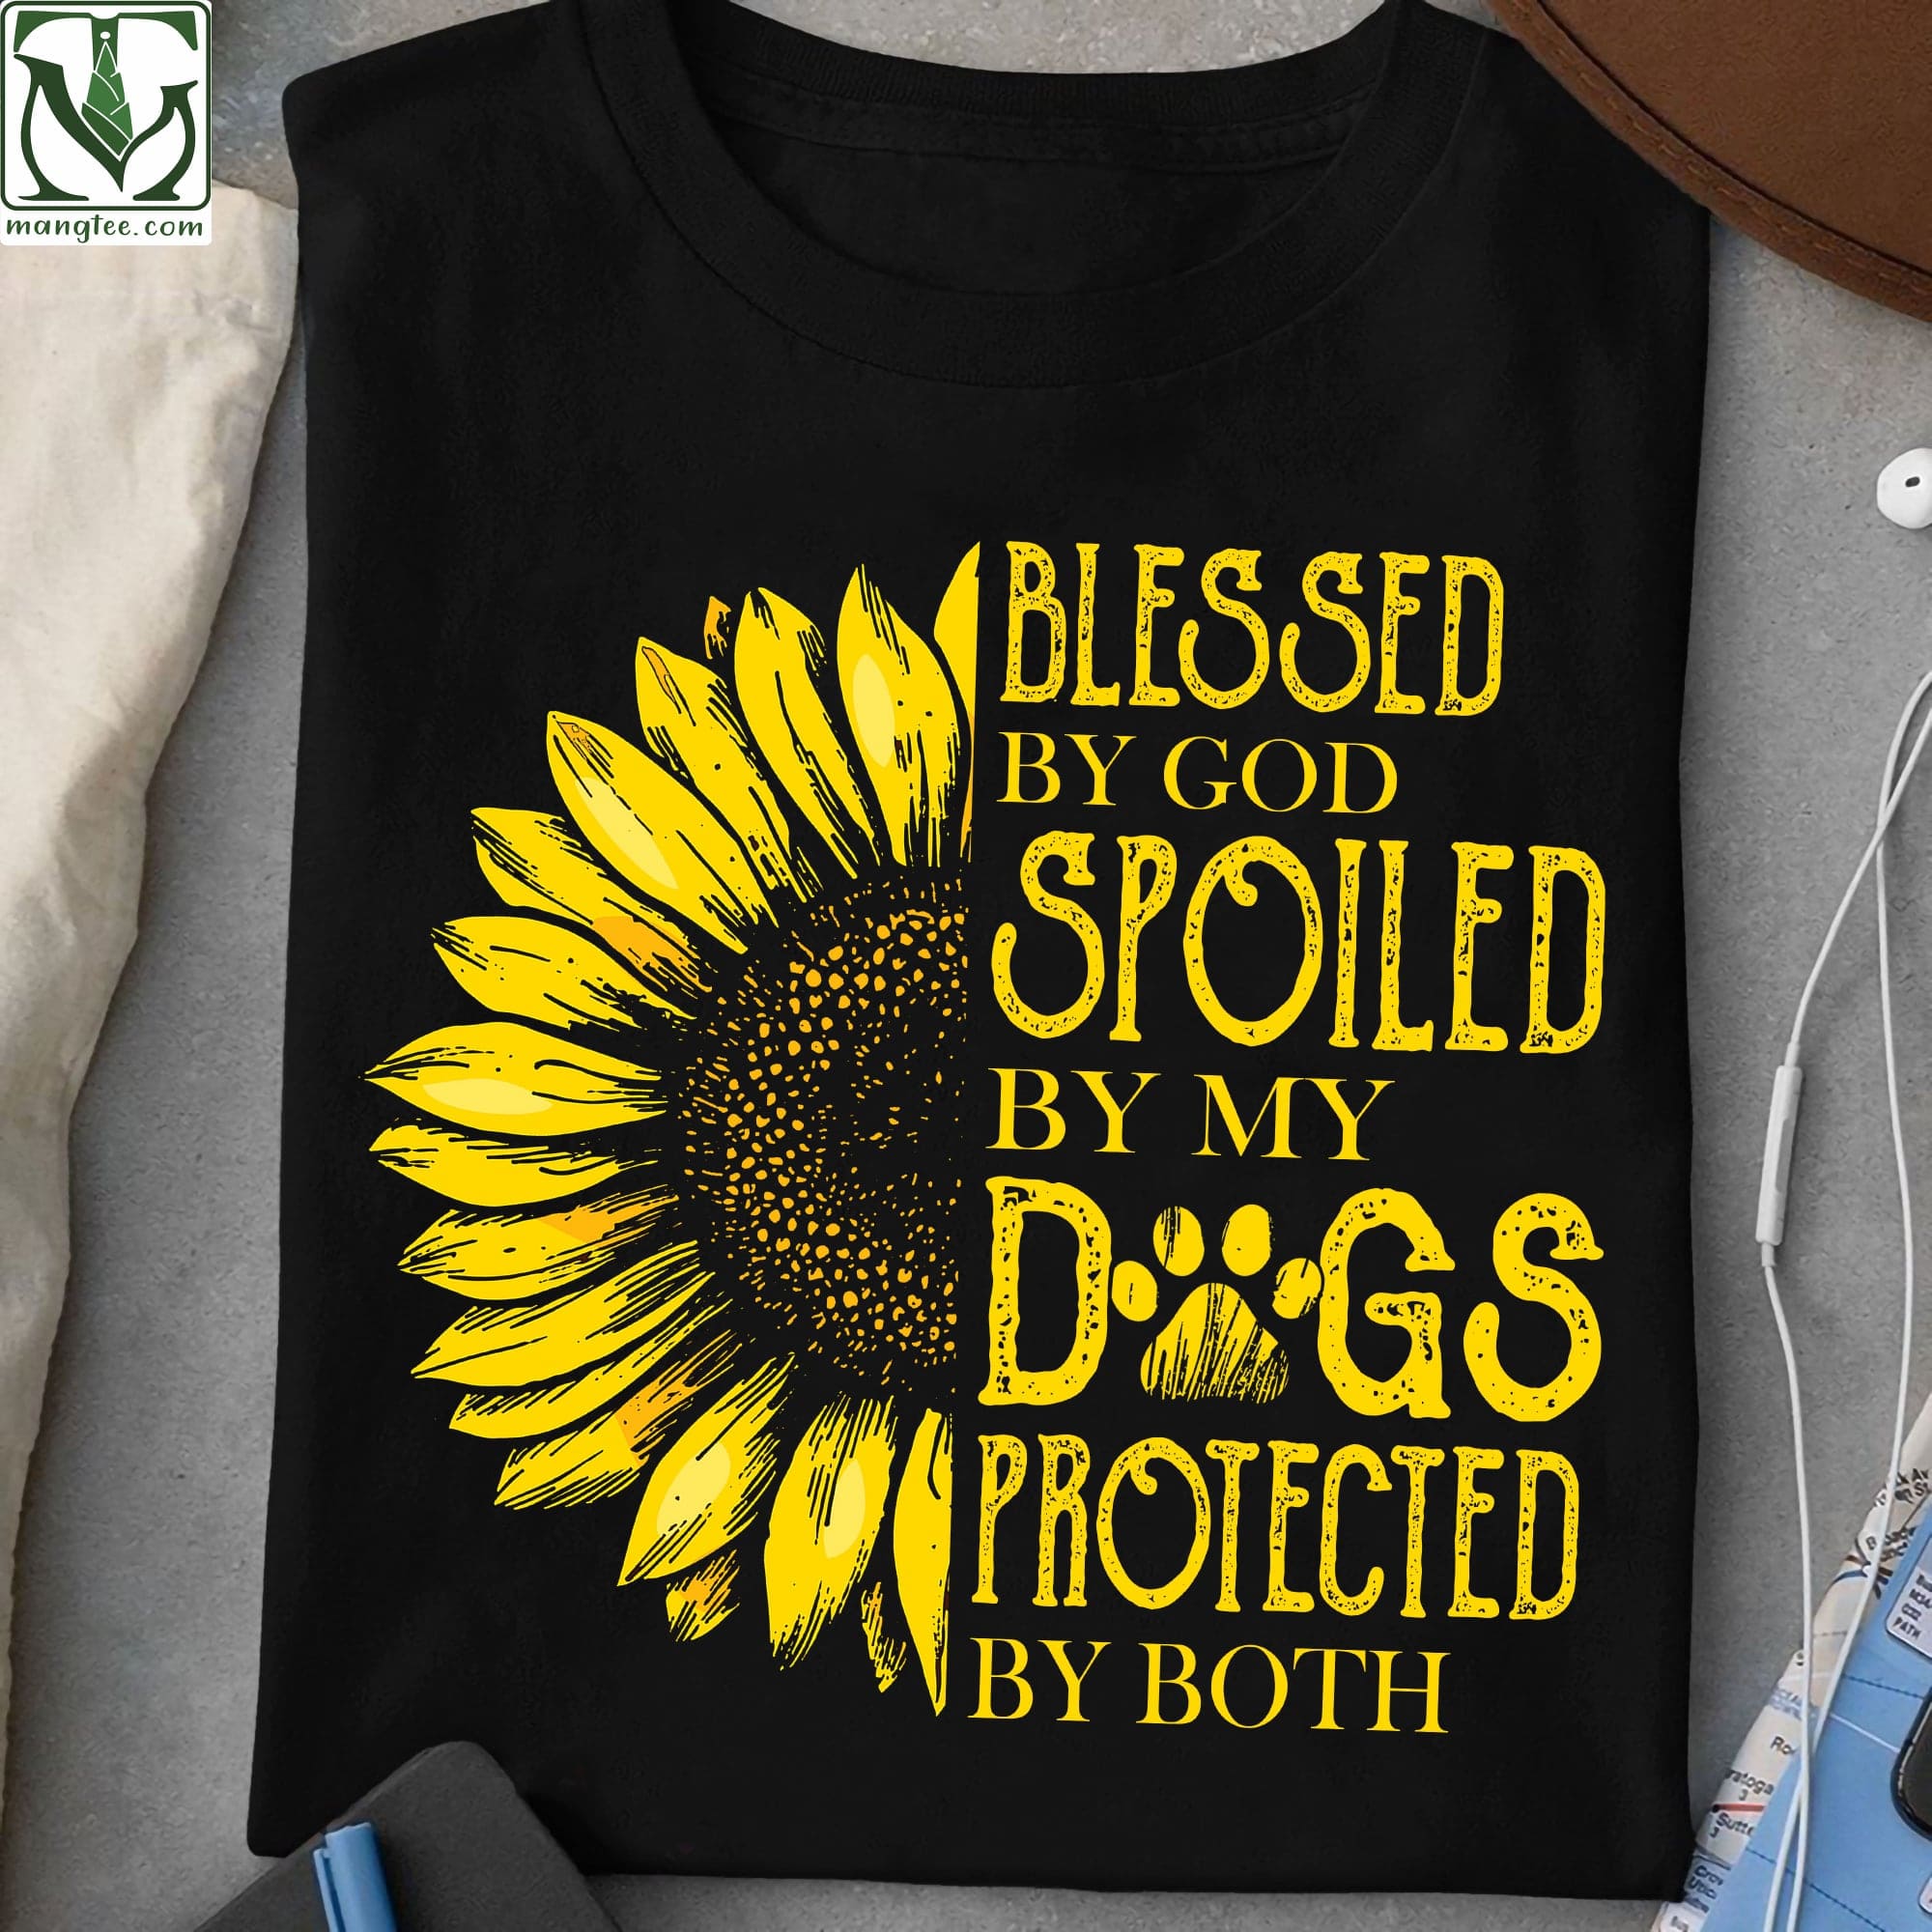 Blessed by God, spoiled by my dogs, protected by both - Gift for dog person